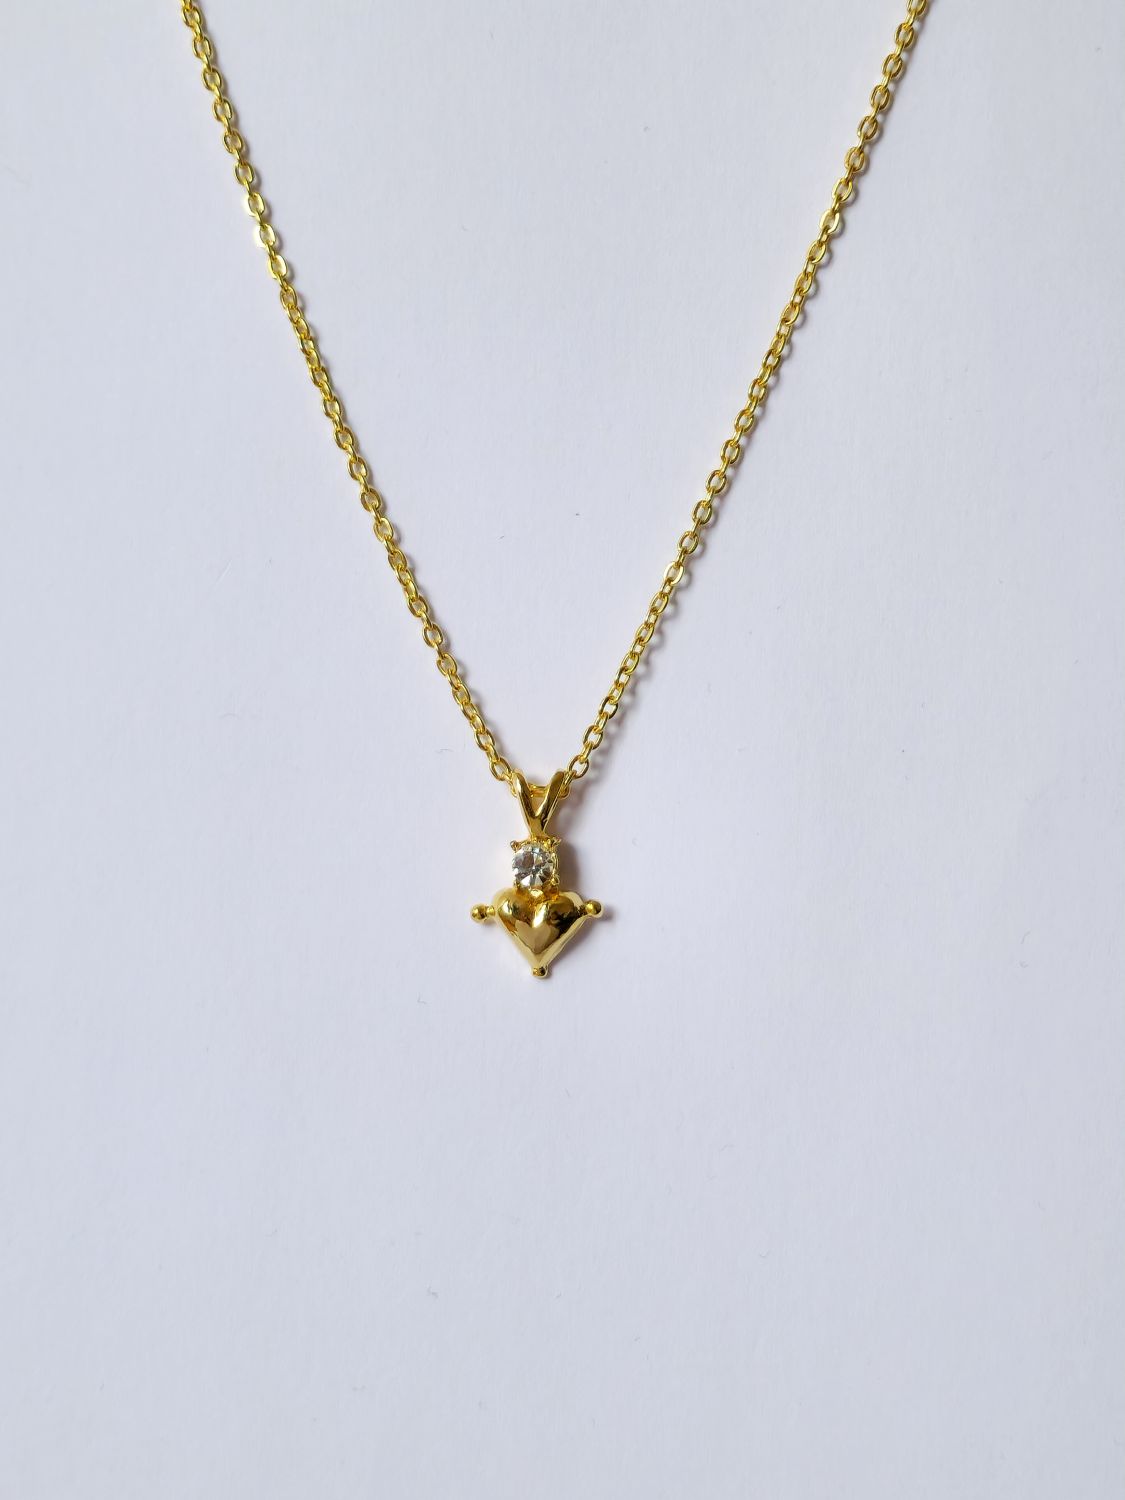 Vintage Gold Plated Thin Cable Chain Pendant Necklace with Heart Charm